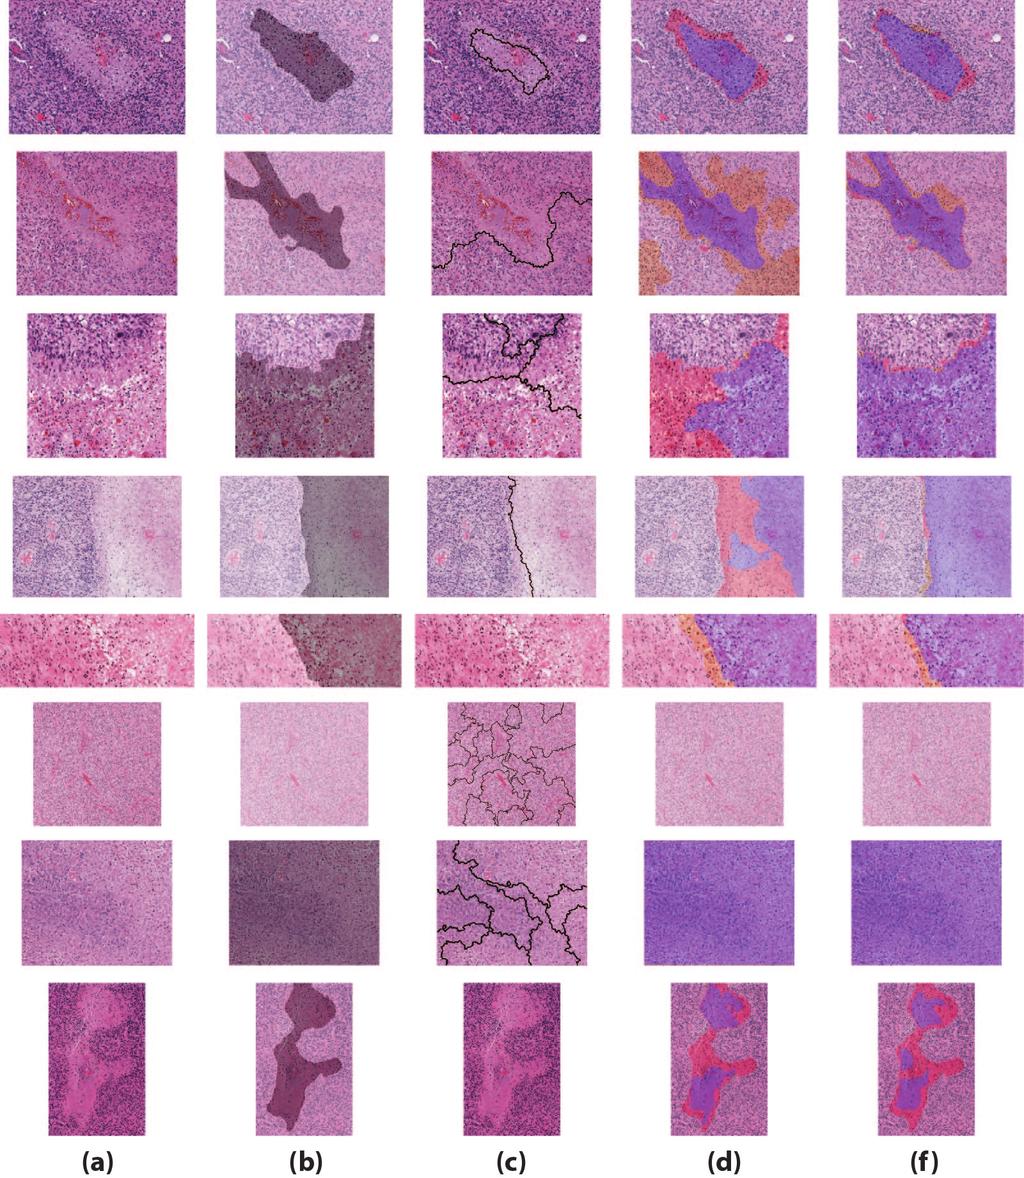 data. The GraphRLM method is an unsupervised method to segment histopathology tissue images. It is not suitable for segmenting necrosis and non-necrosis regions.